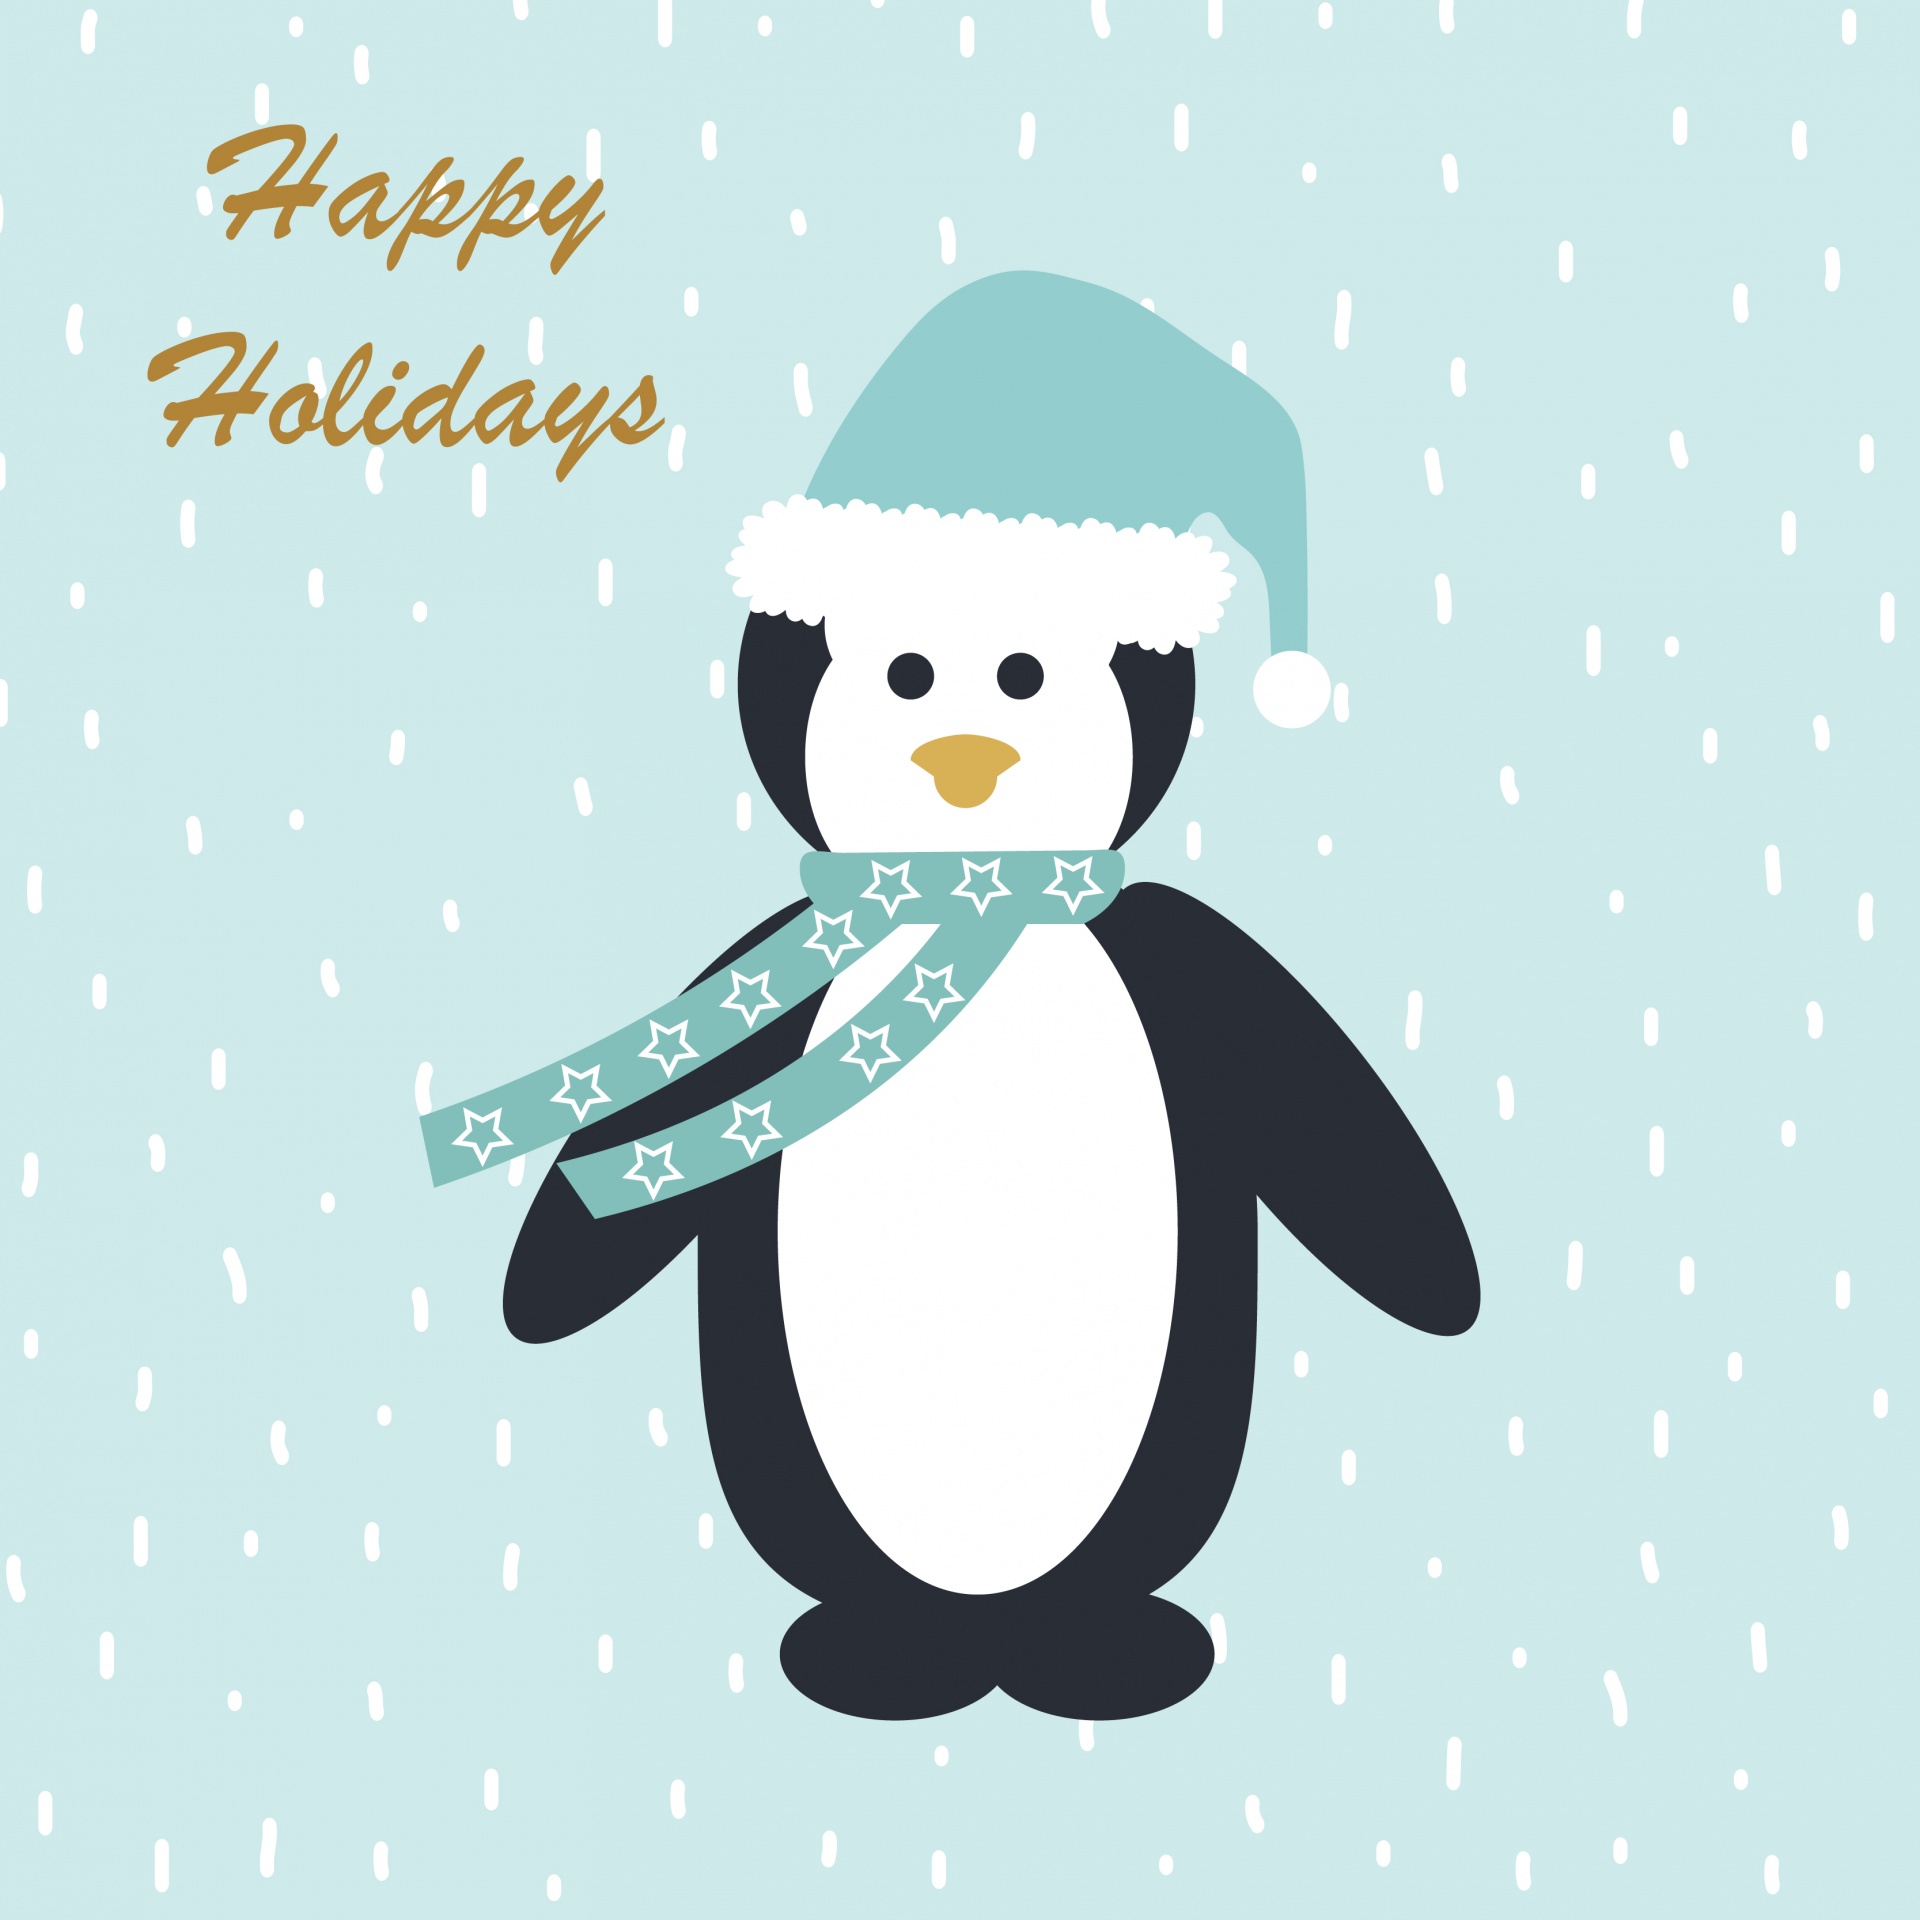 Cute illustration of cartoon penguin on snowy background wearing hat and scarf holiday card